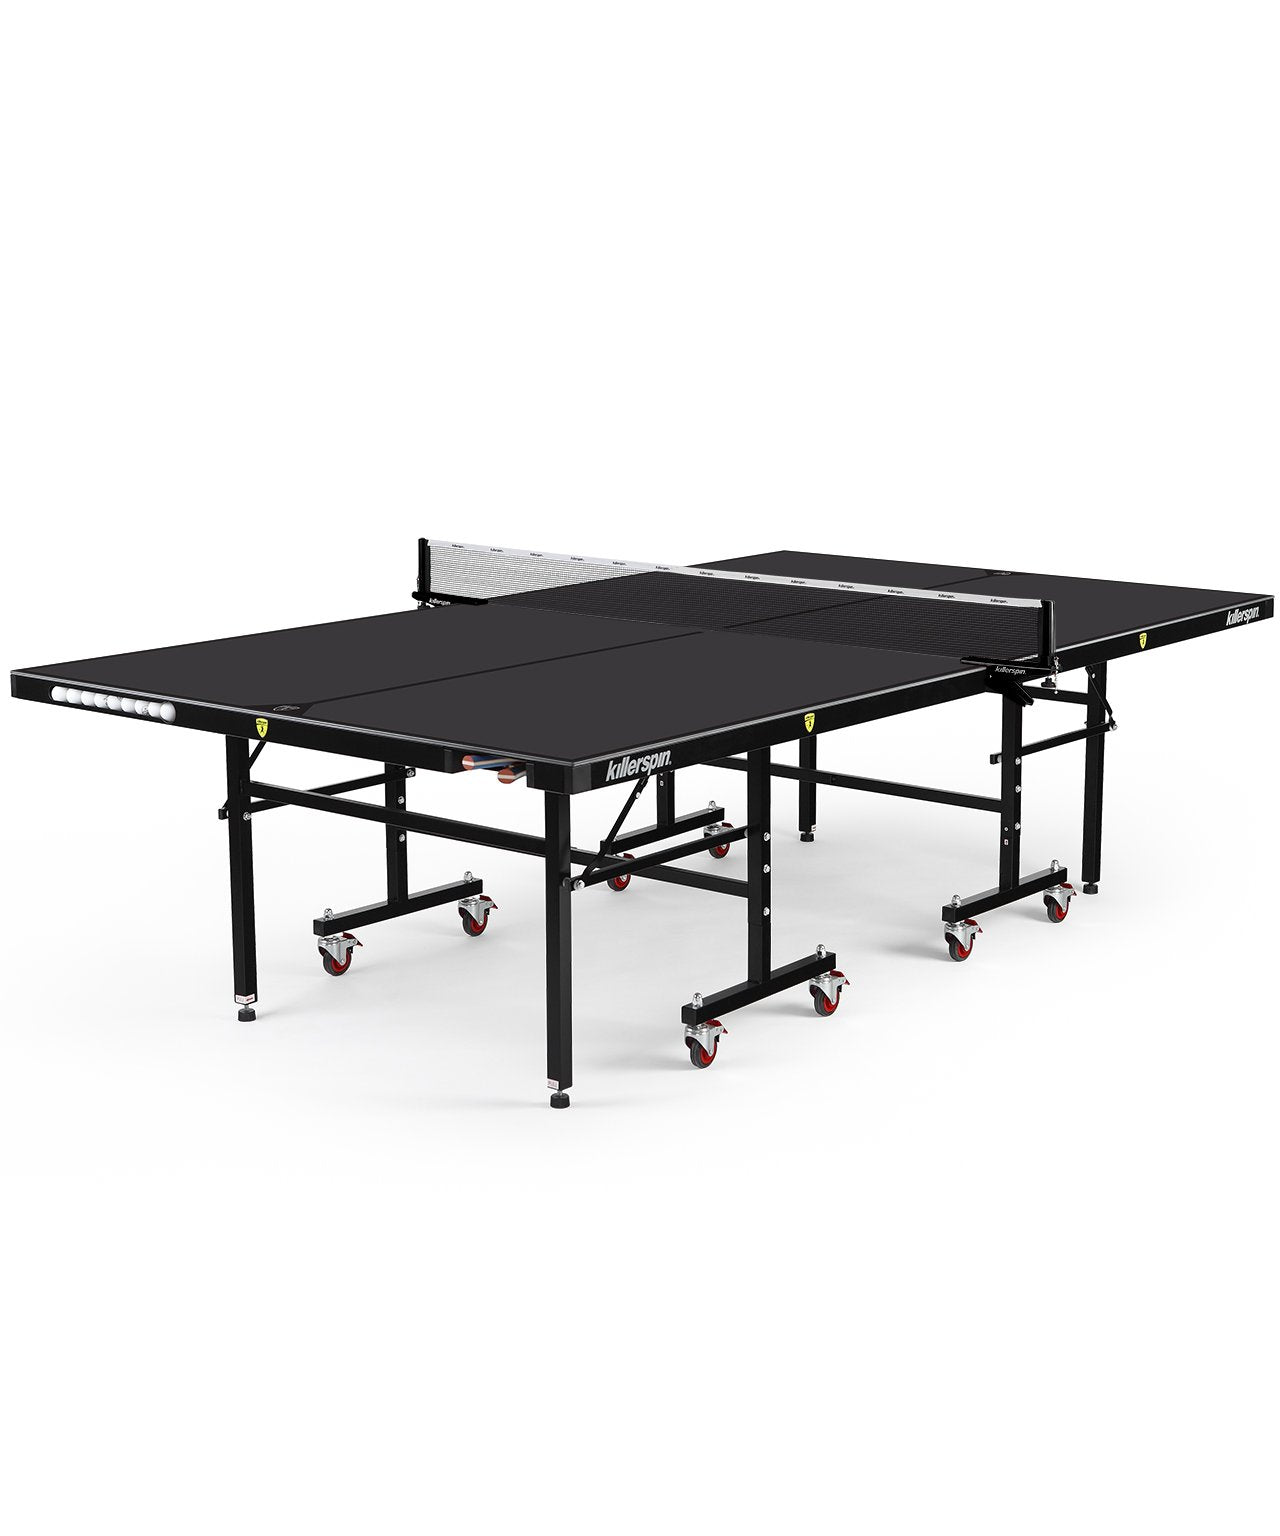 Outdoor Ping Pong Table with Storage Pockets - MyT10 BlackStorm by Killerspin - Gym Gear Direct